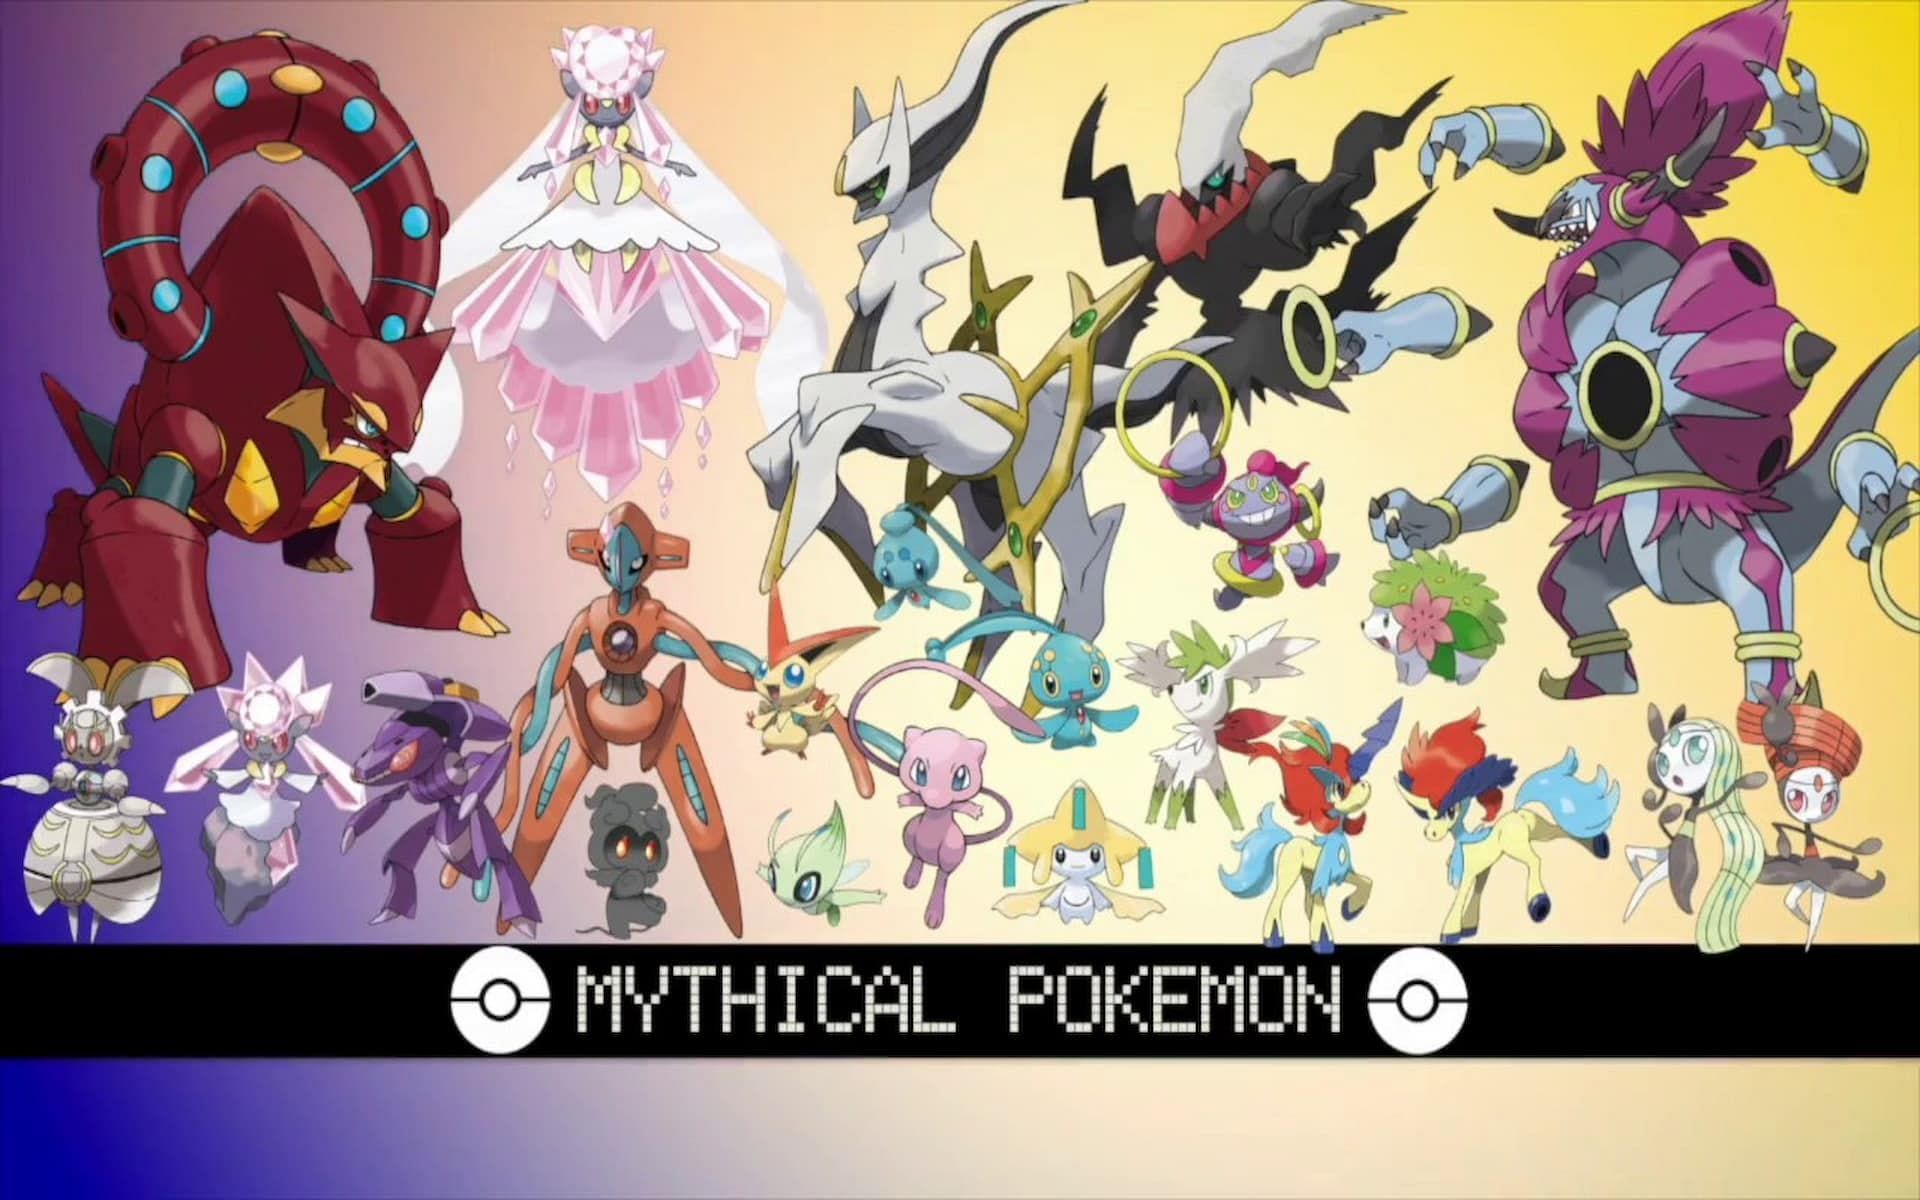 Top 5 Mythical Pokemon Of All Time